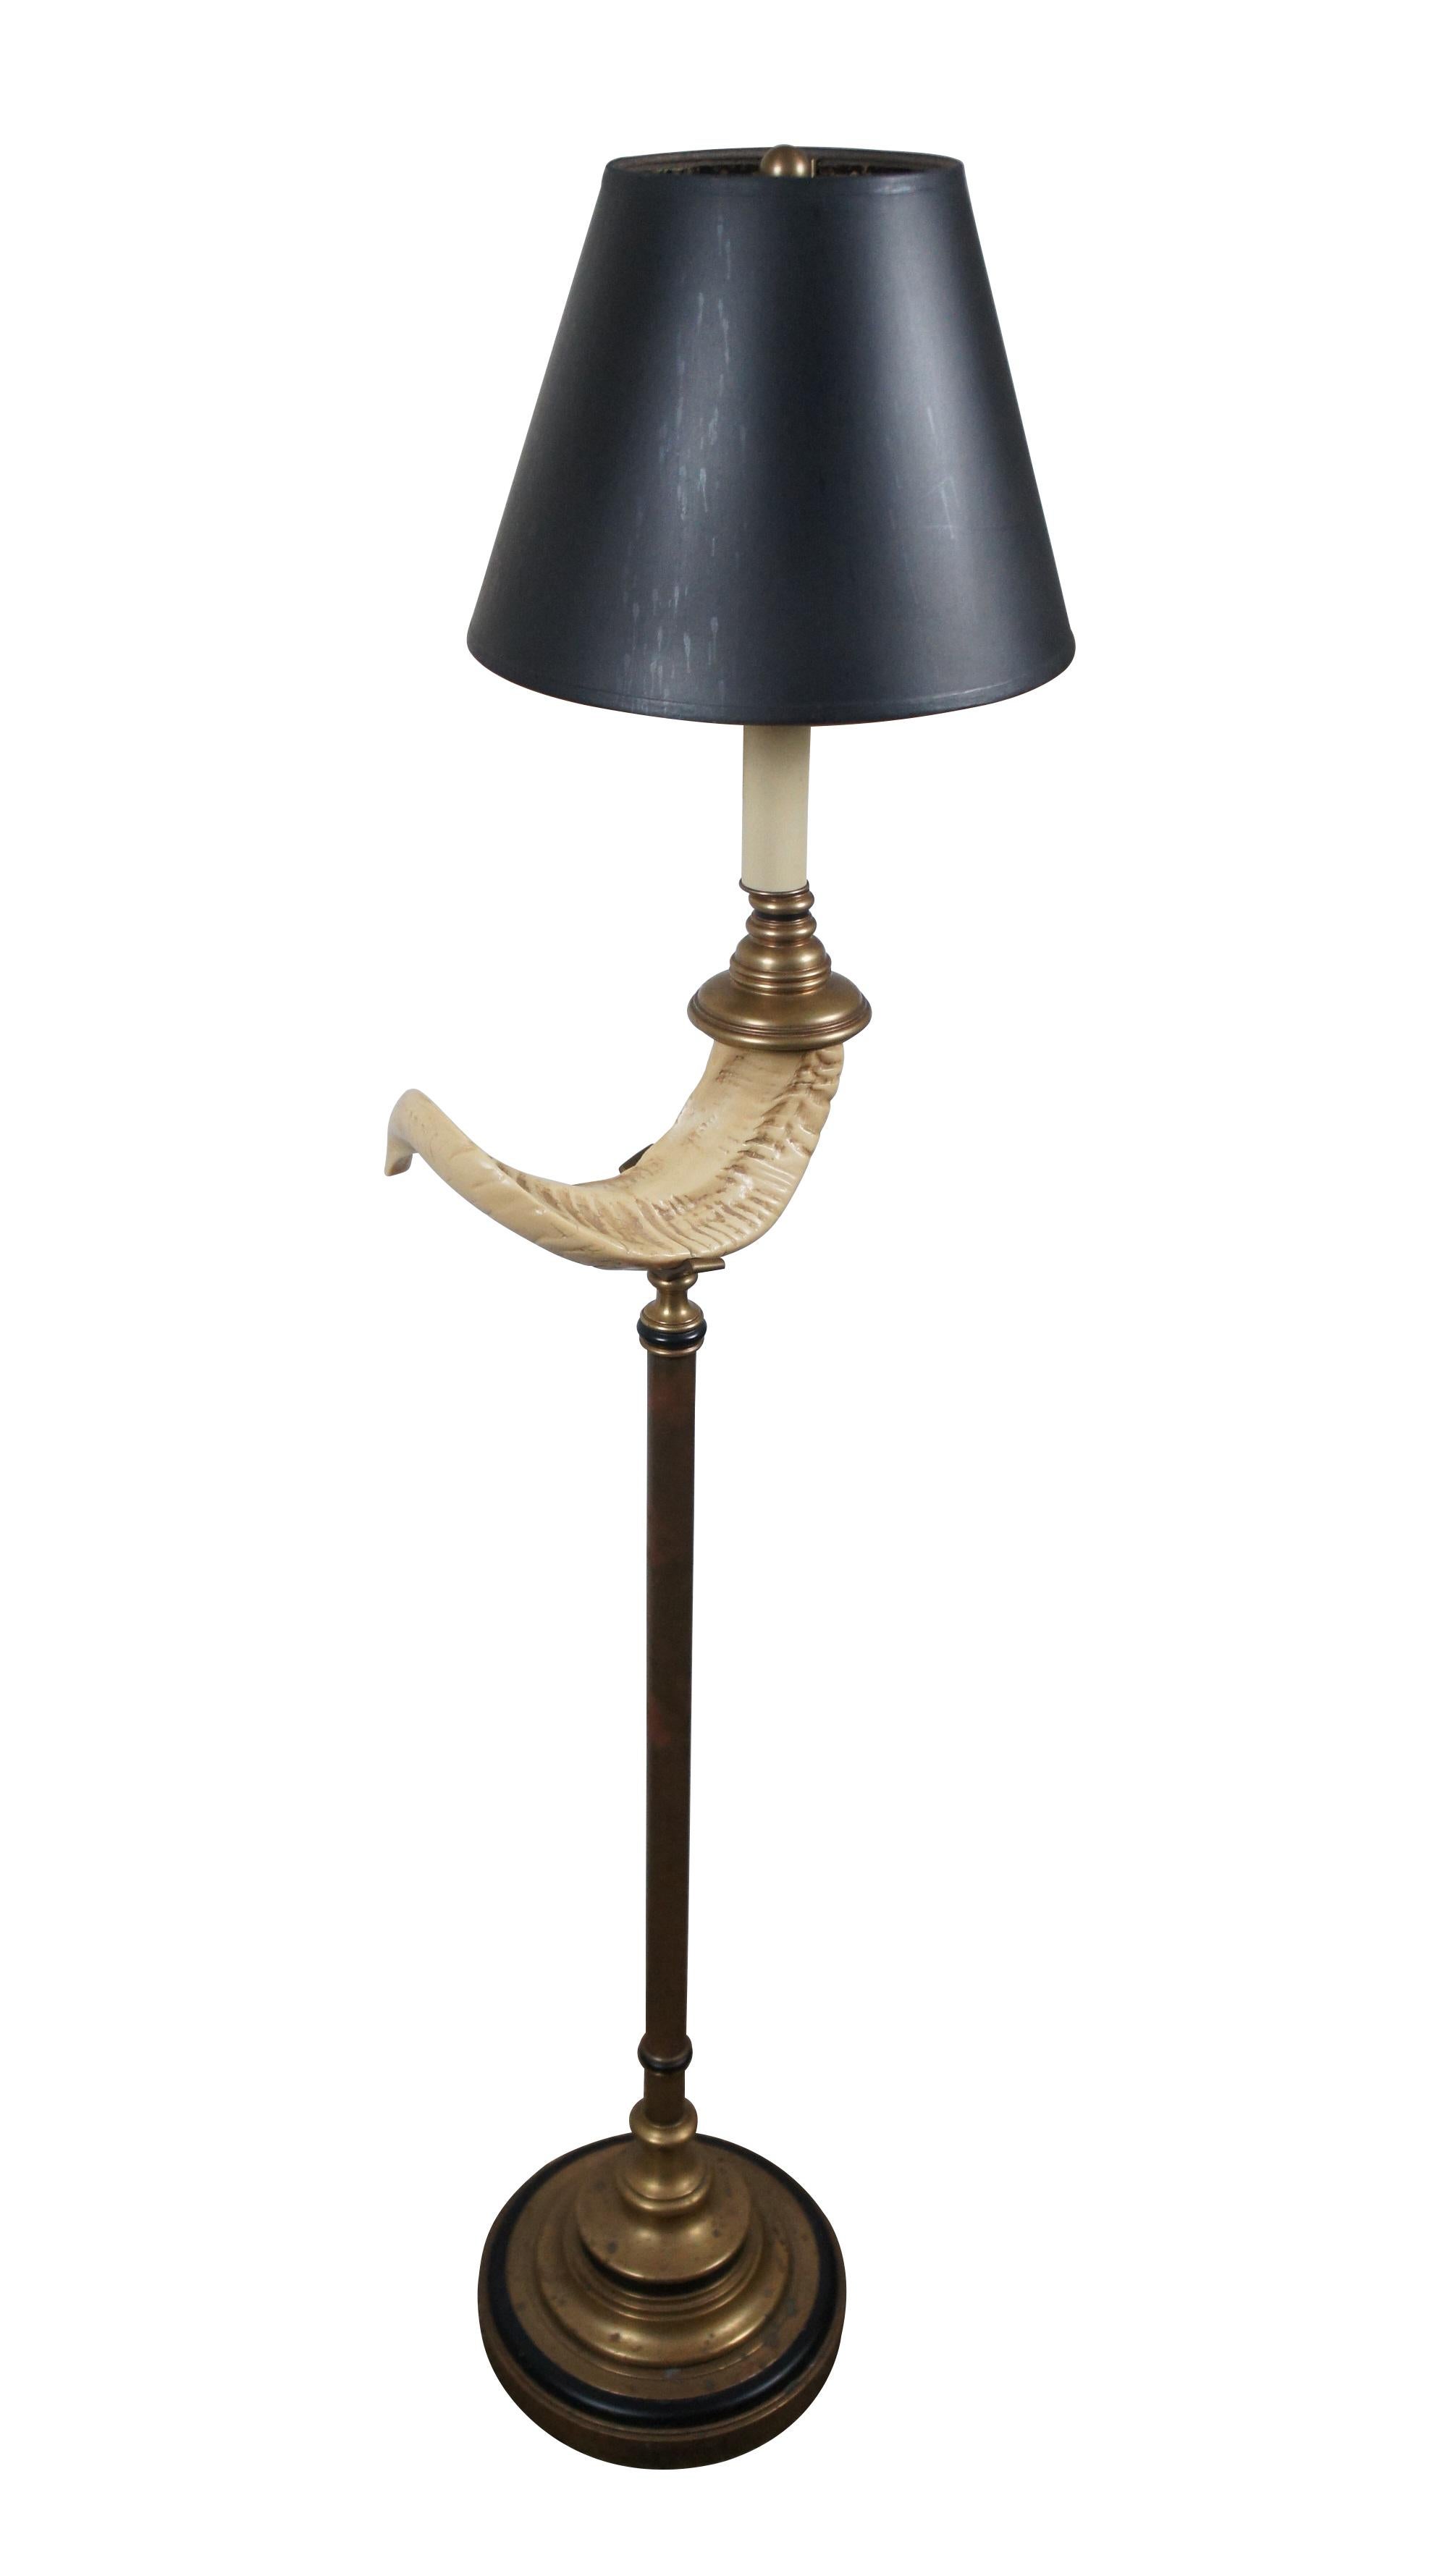 Circa 1970's Chapman Brass floor lamp featuring a round, stepped pedestal base and artificial ram's horn perched on the column body with black accents, leading to a faux candlestick top. Black paper shade with foiled interior. Includes harp and ball